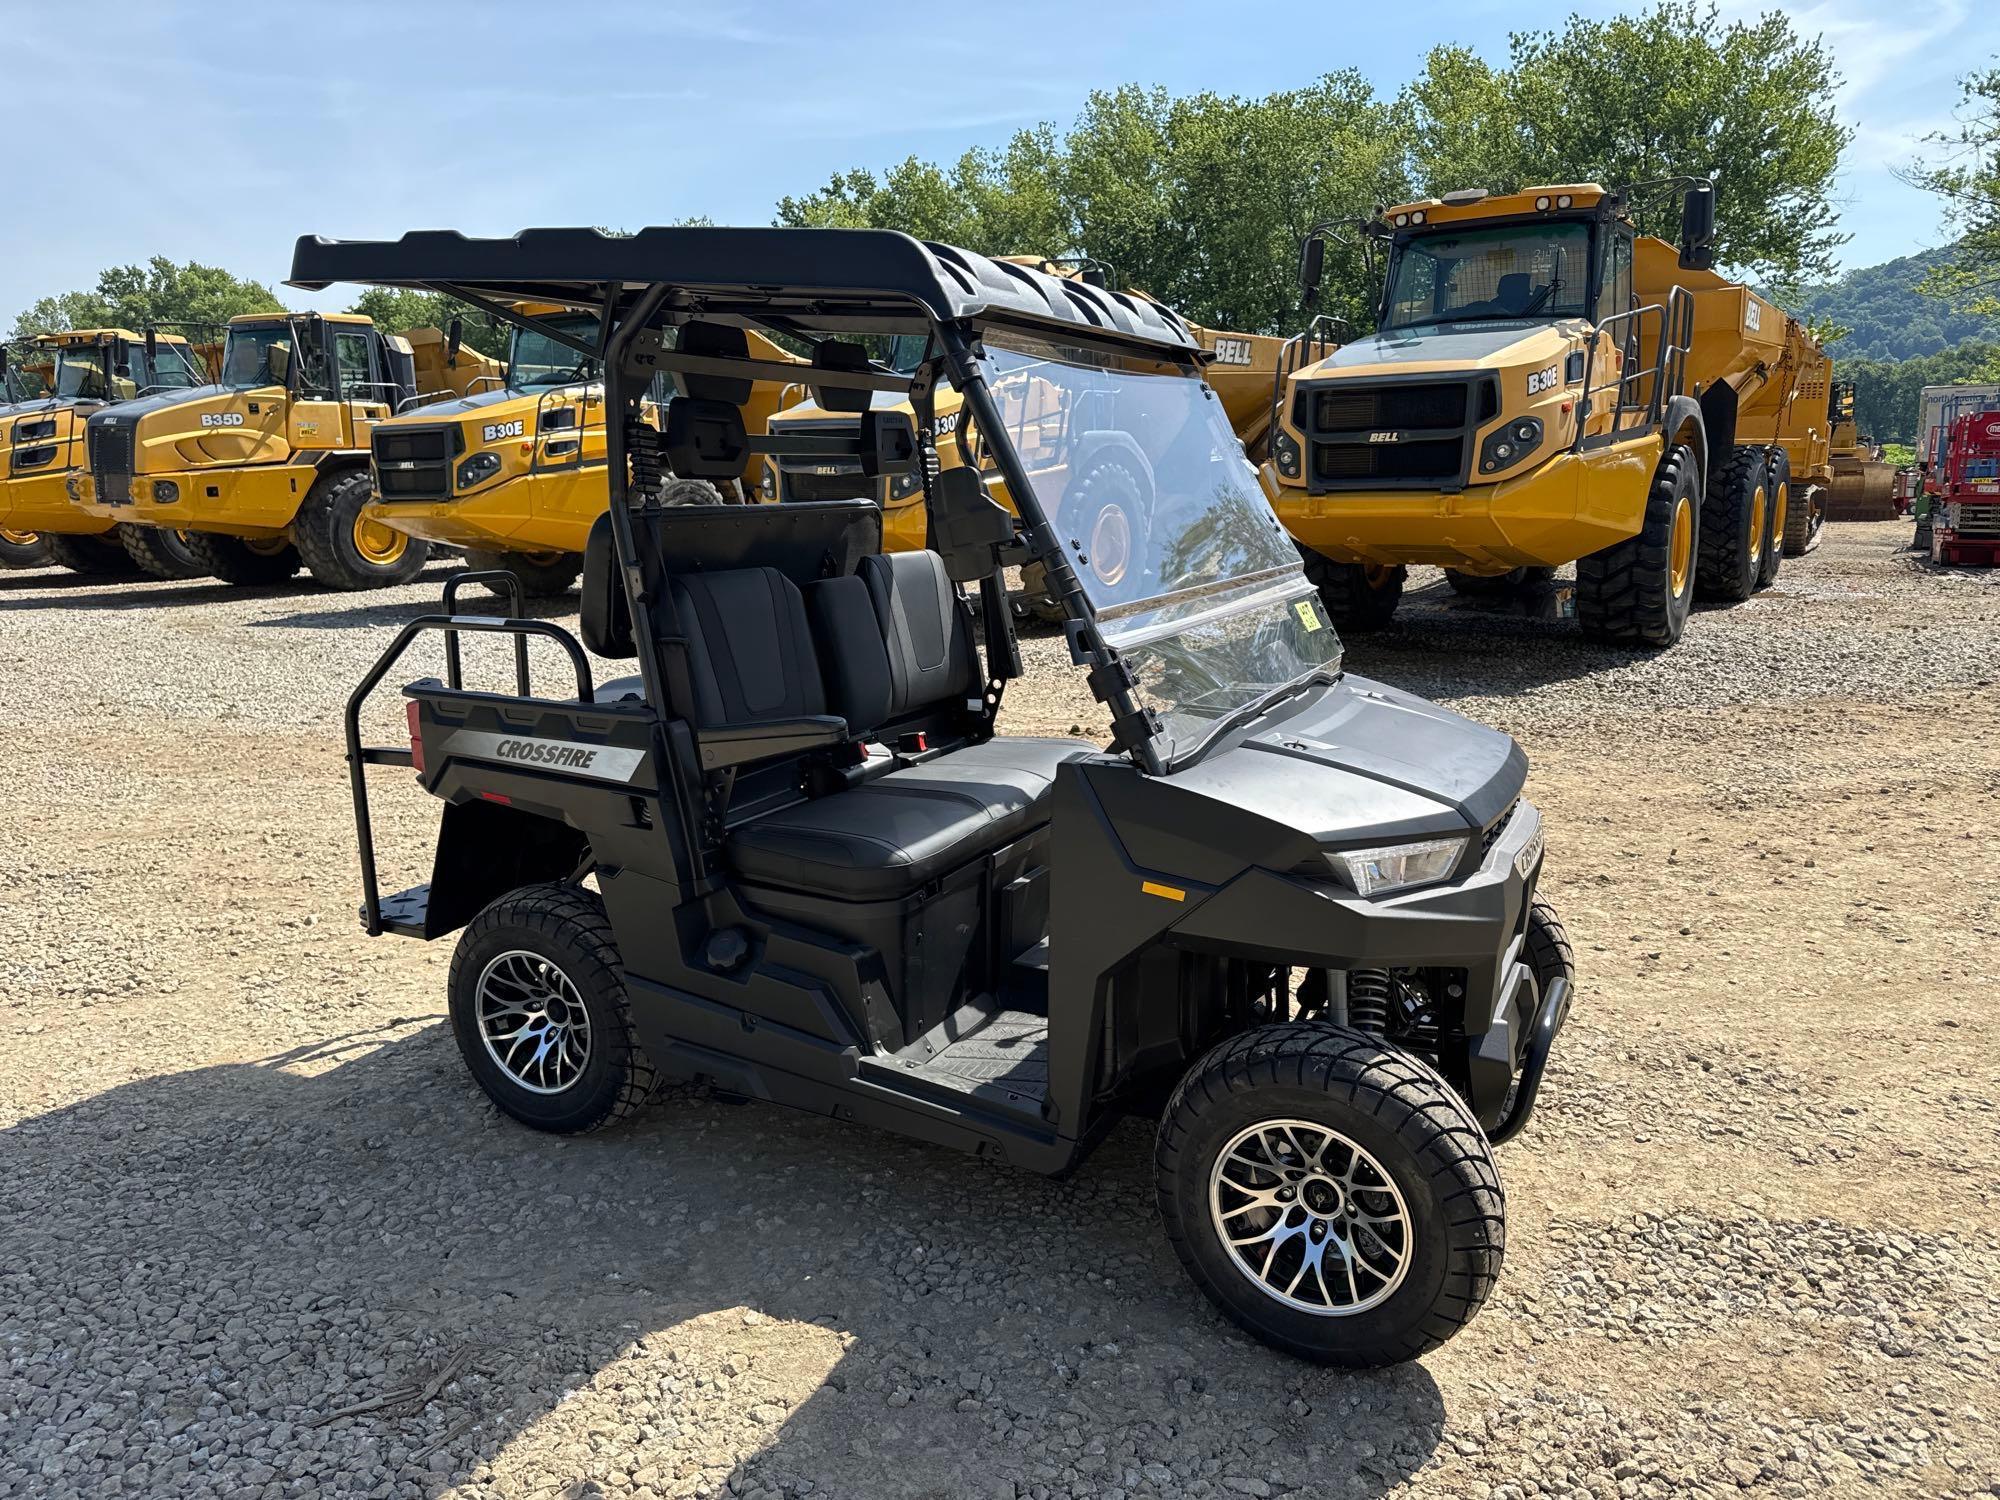 NEW UNUSED CROSSFIRE LH200U UTILITY VEHICLE powered by 177CC EFI gas engine, equipped with ROPS,